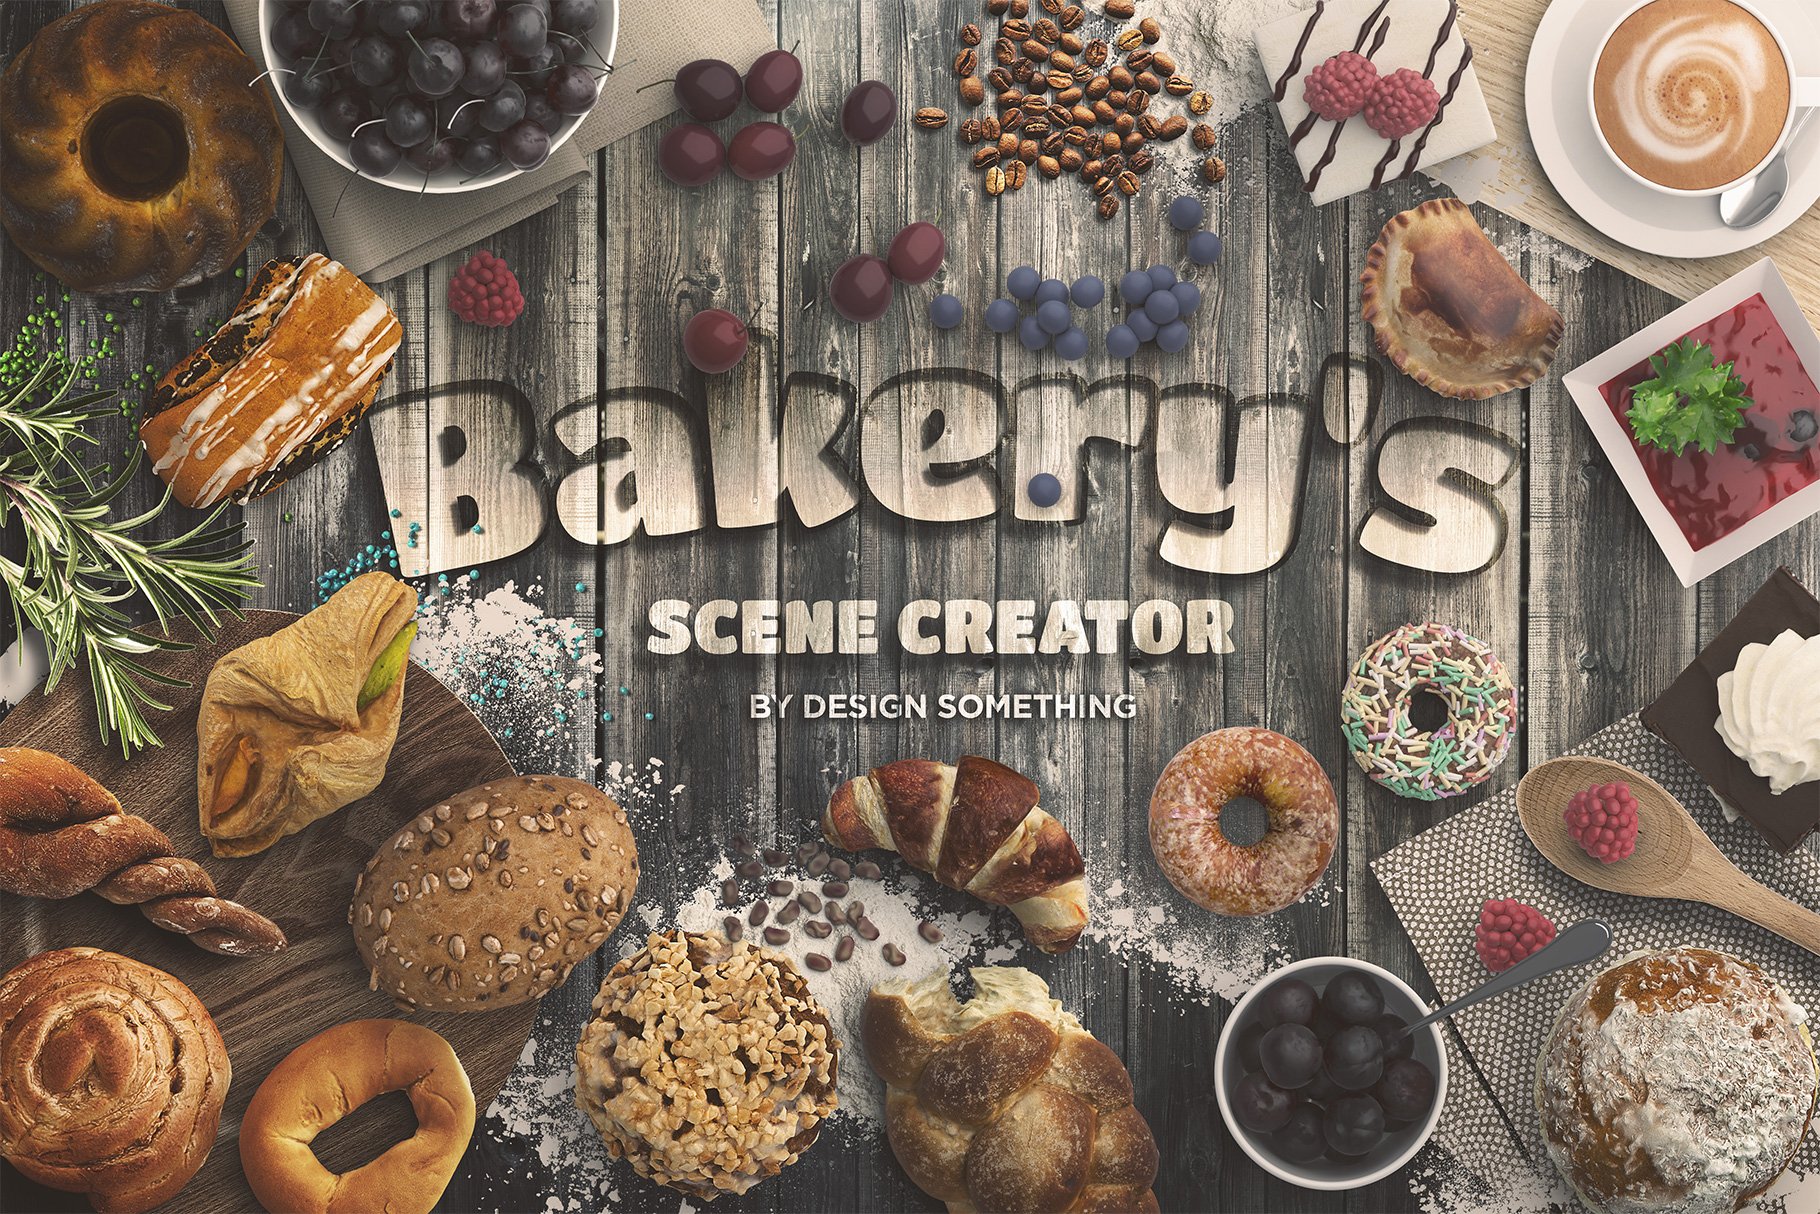 Bakery Scene Creator Top View cover image.